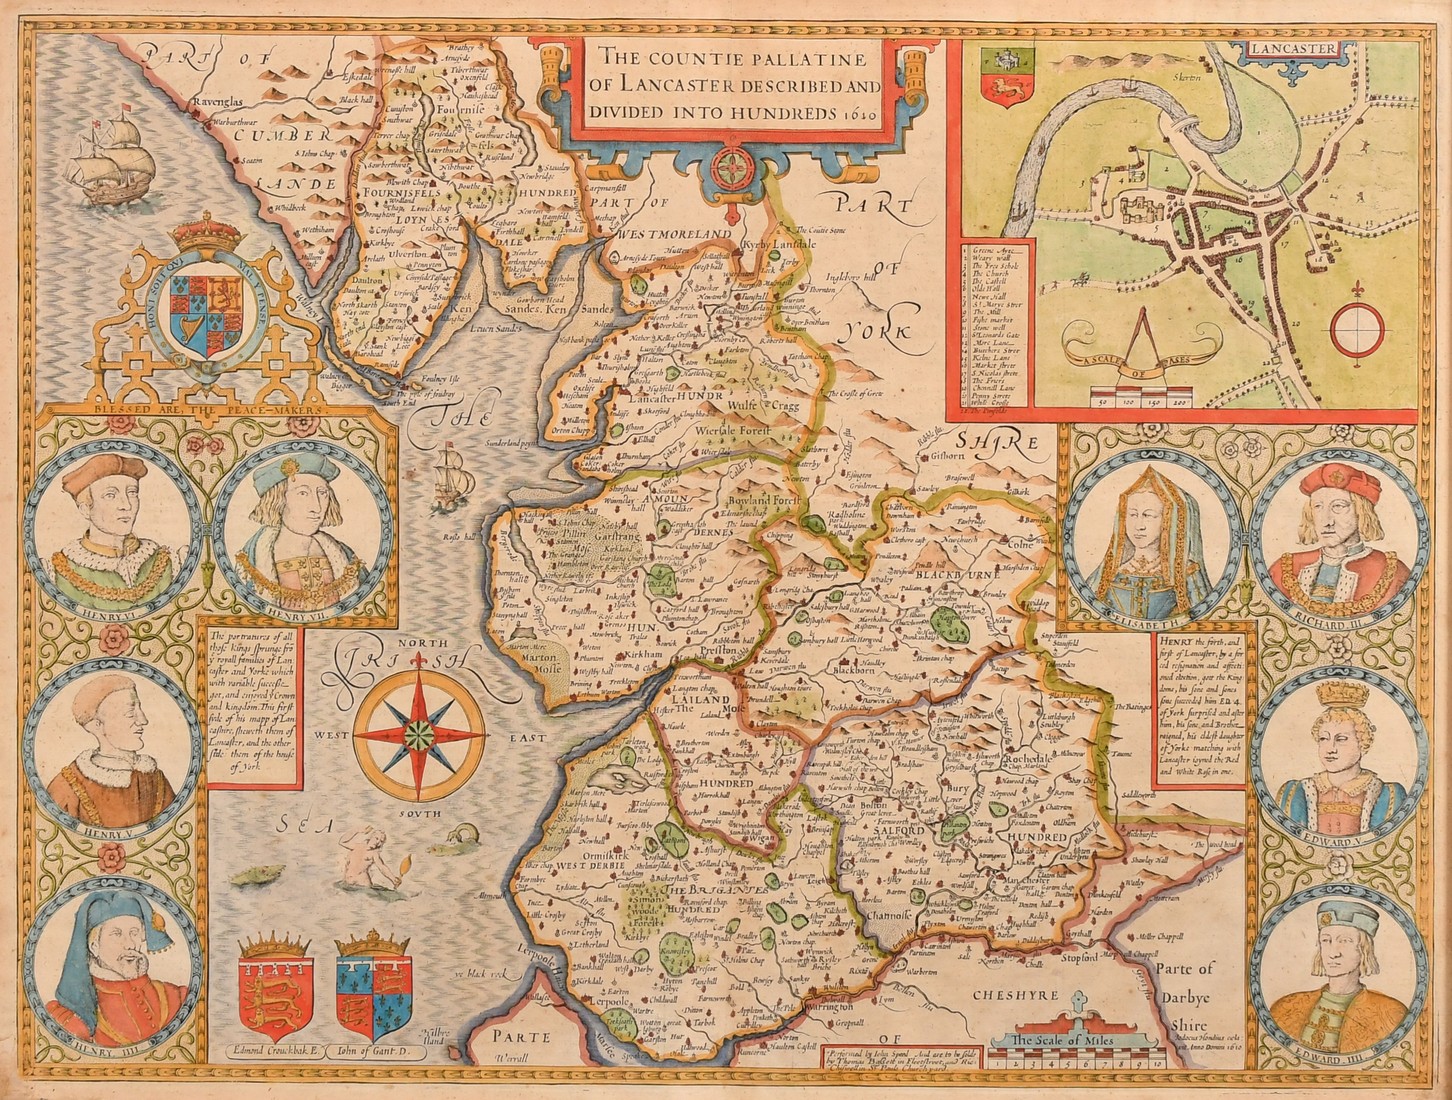 John Speed, a 17th Century map of 'The Countie Pallatine of Lancaster', hand coloured, 16" x 21" (41